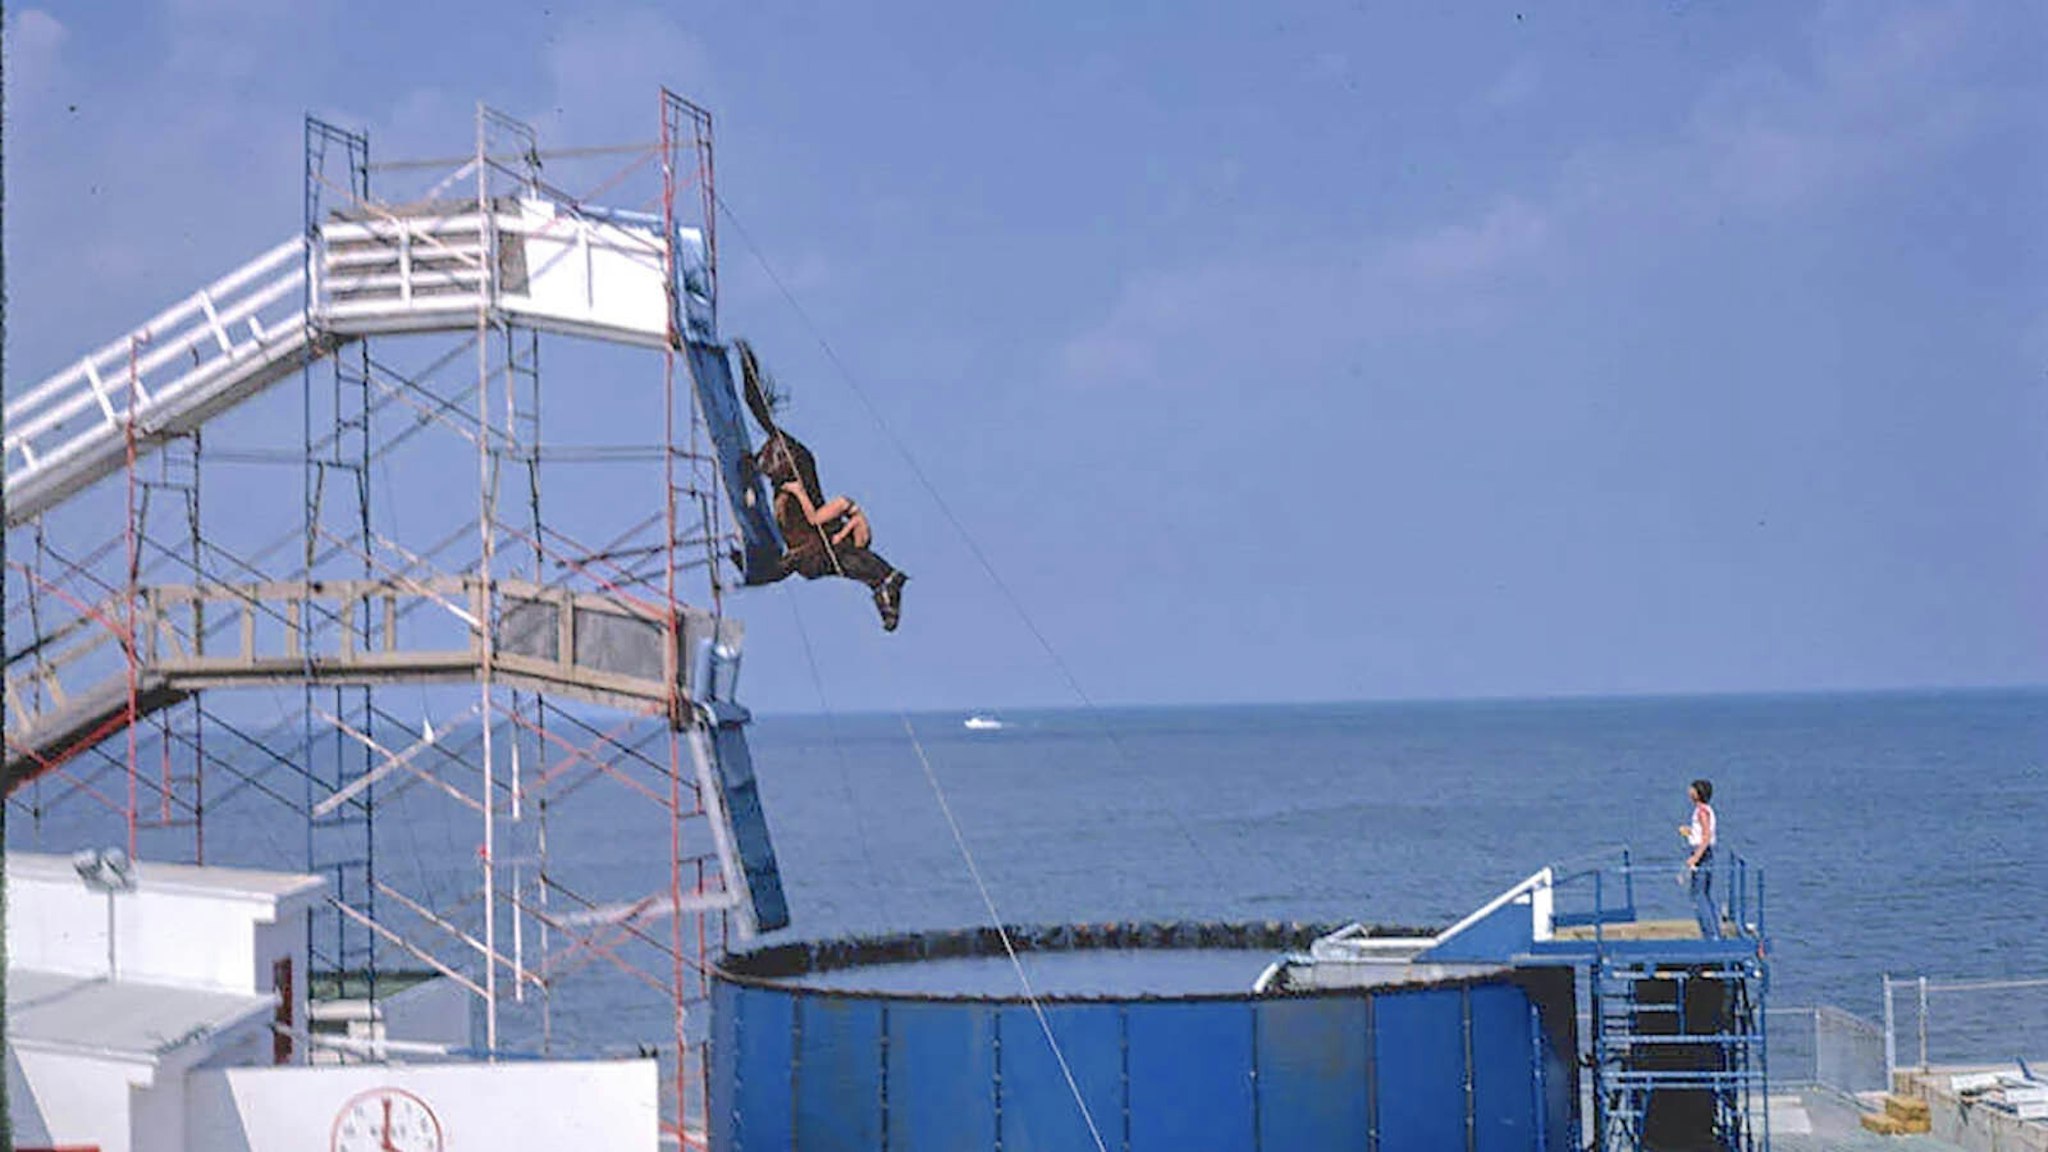 Horse-Diving-A-horse-takes-a-practice-dive-at-Atlantic-Citys-Steel-Pier-park-in-1978.-John-Margolies-Library-of-Congress.jpg